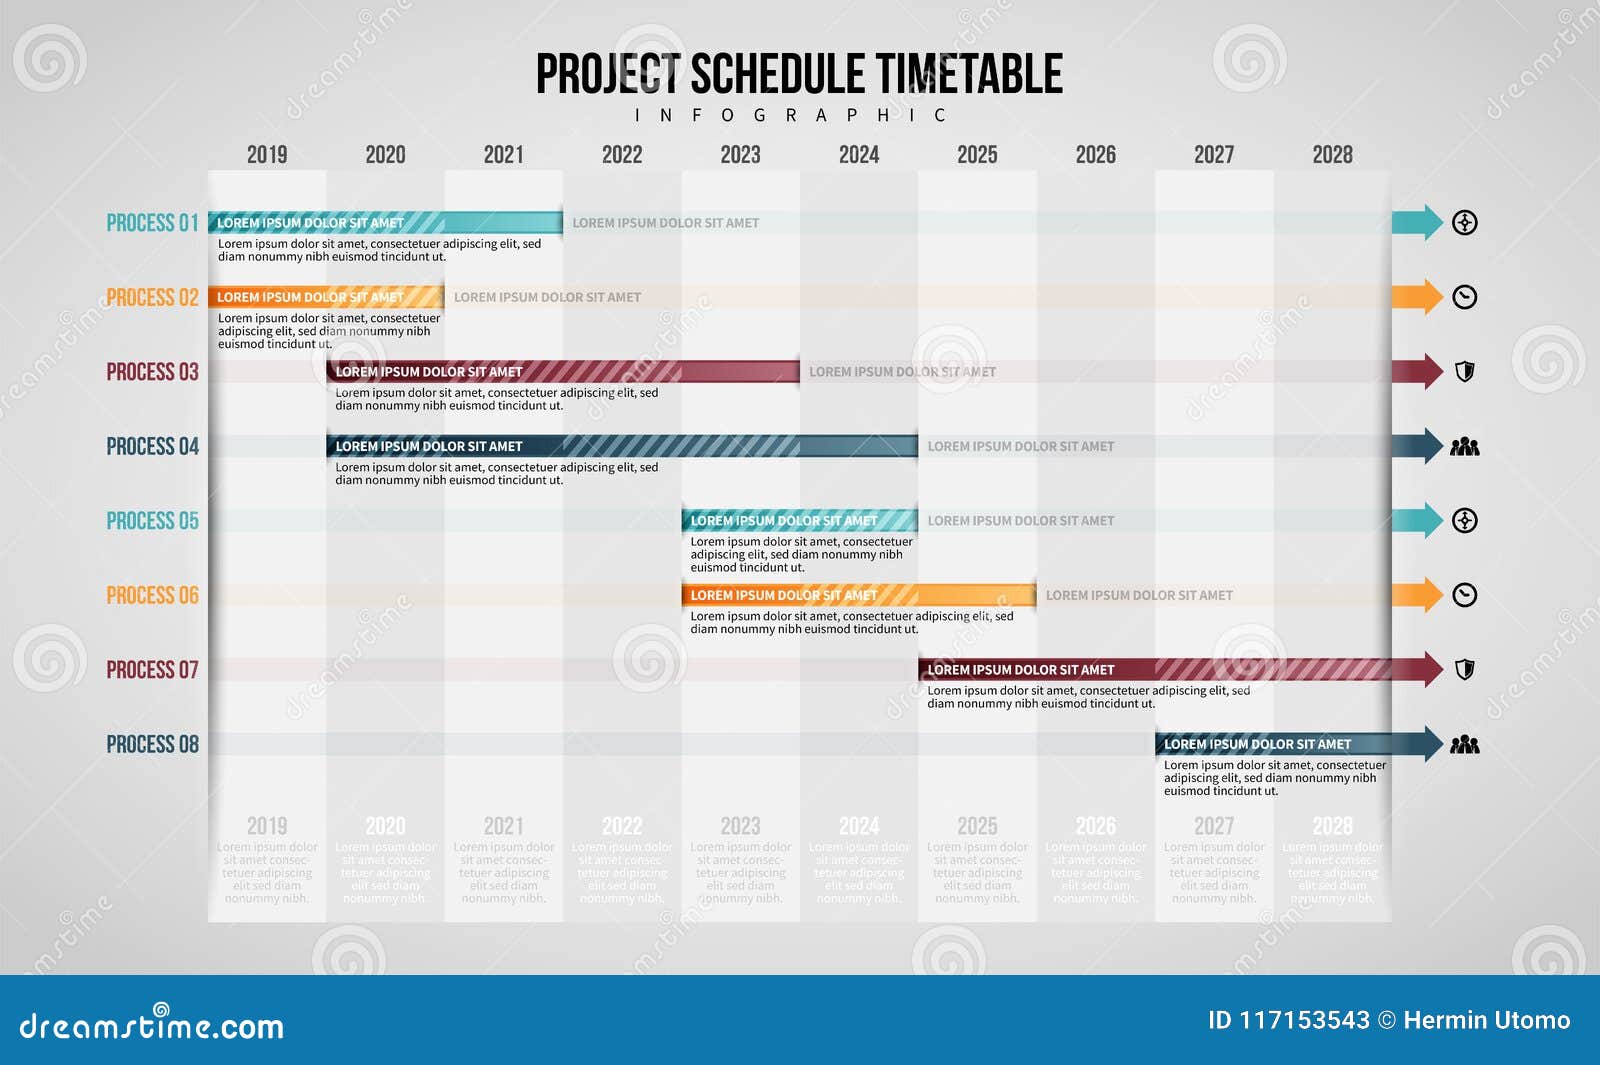 project schedule timetable infographic